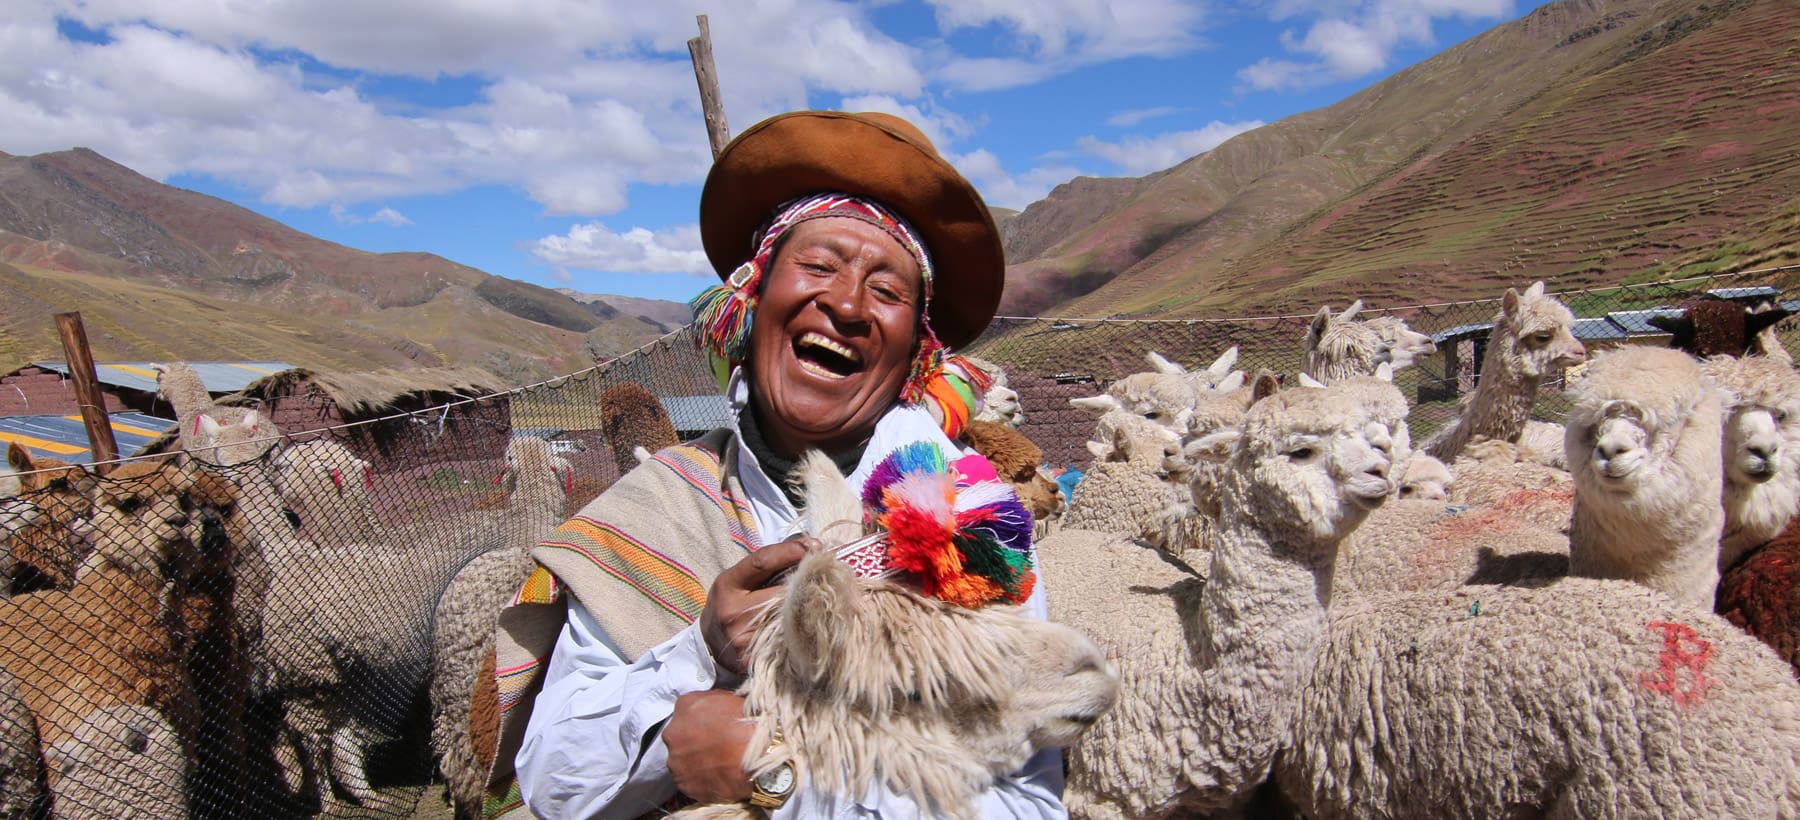 A man in traditional clothing holding a sheep.